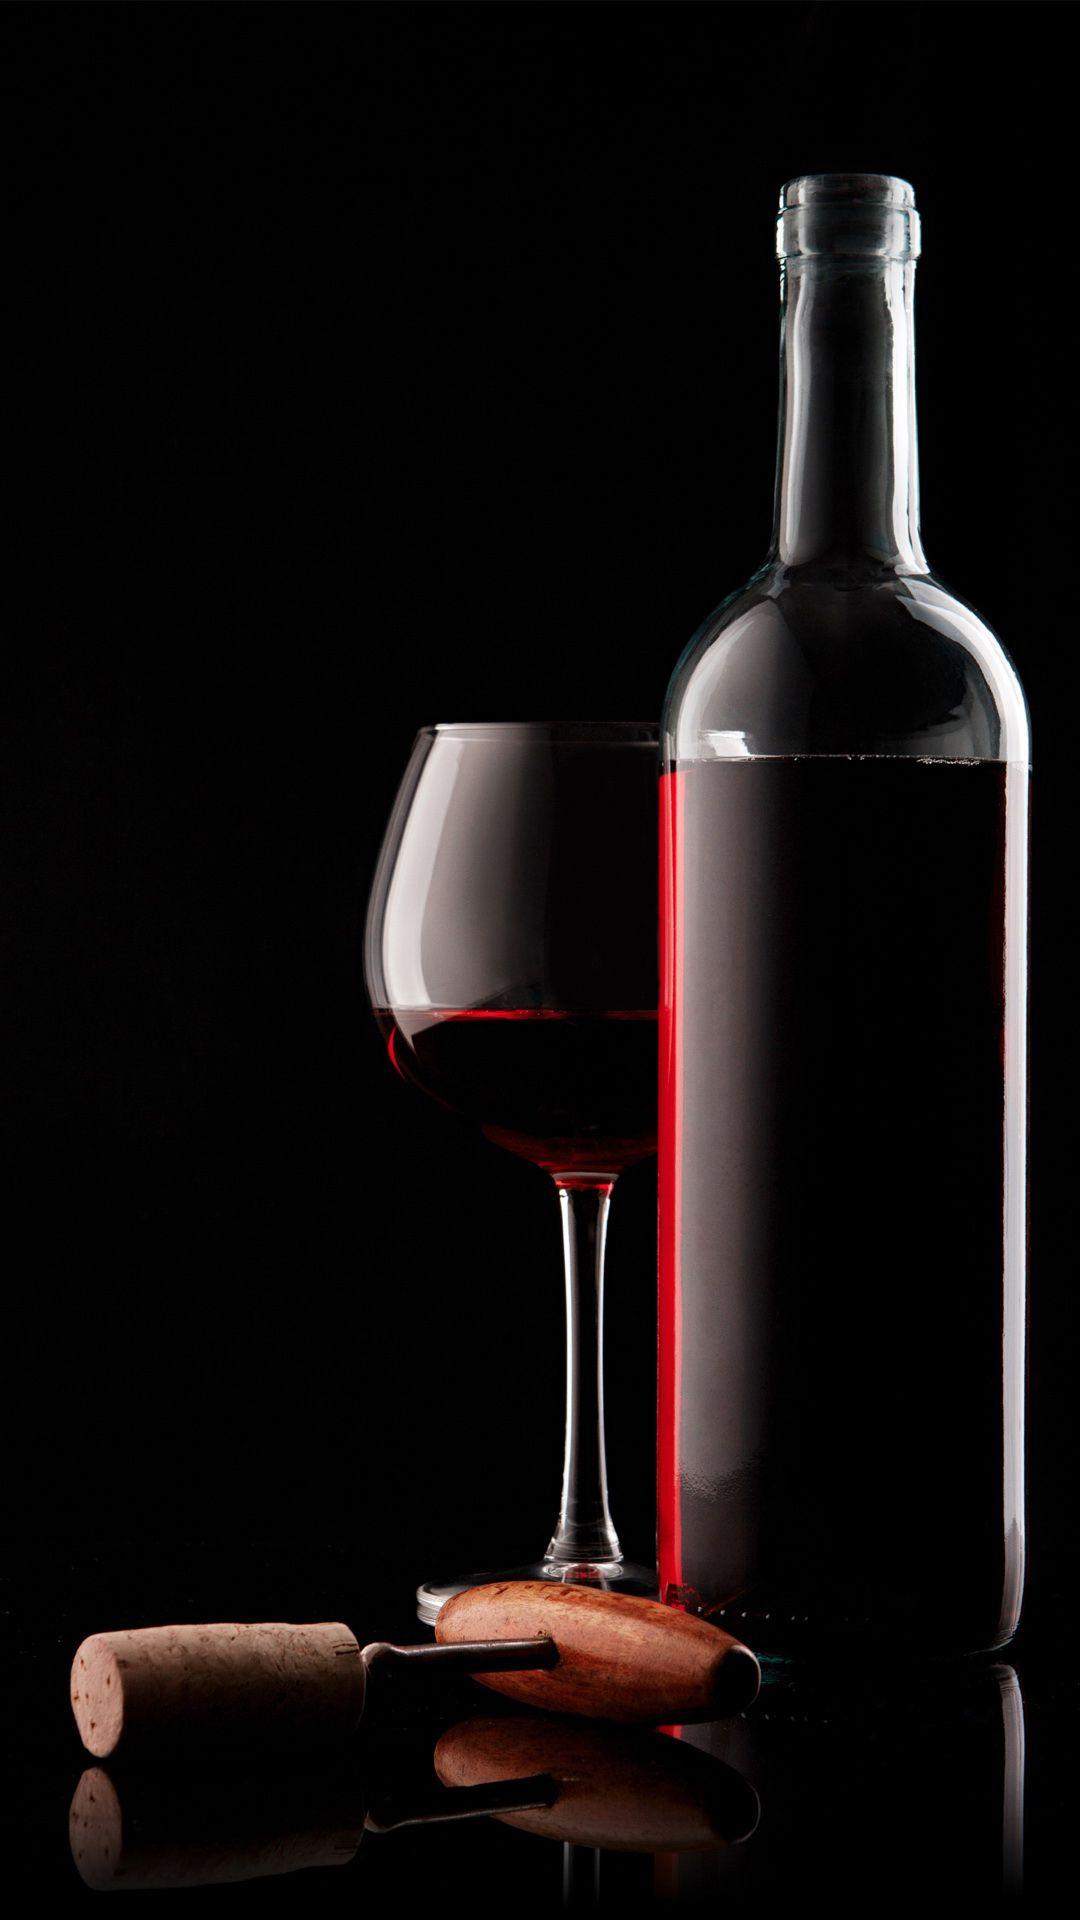 Red Wine Glass, Bottle And Corkscrew Android Wallpaper free download